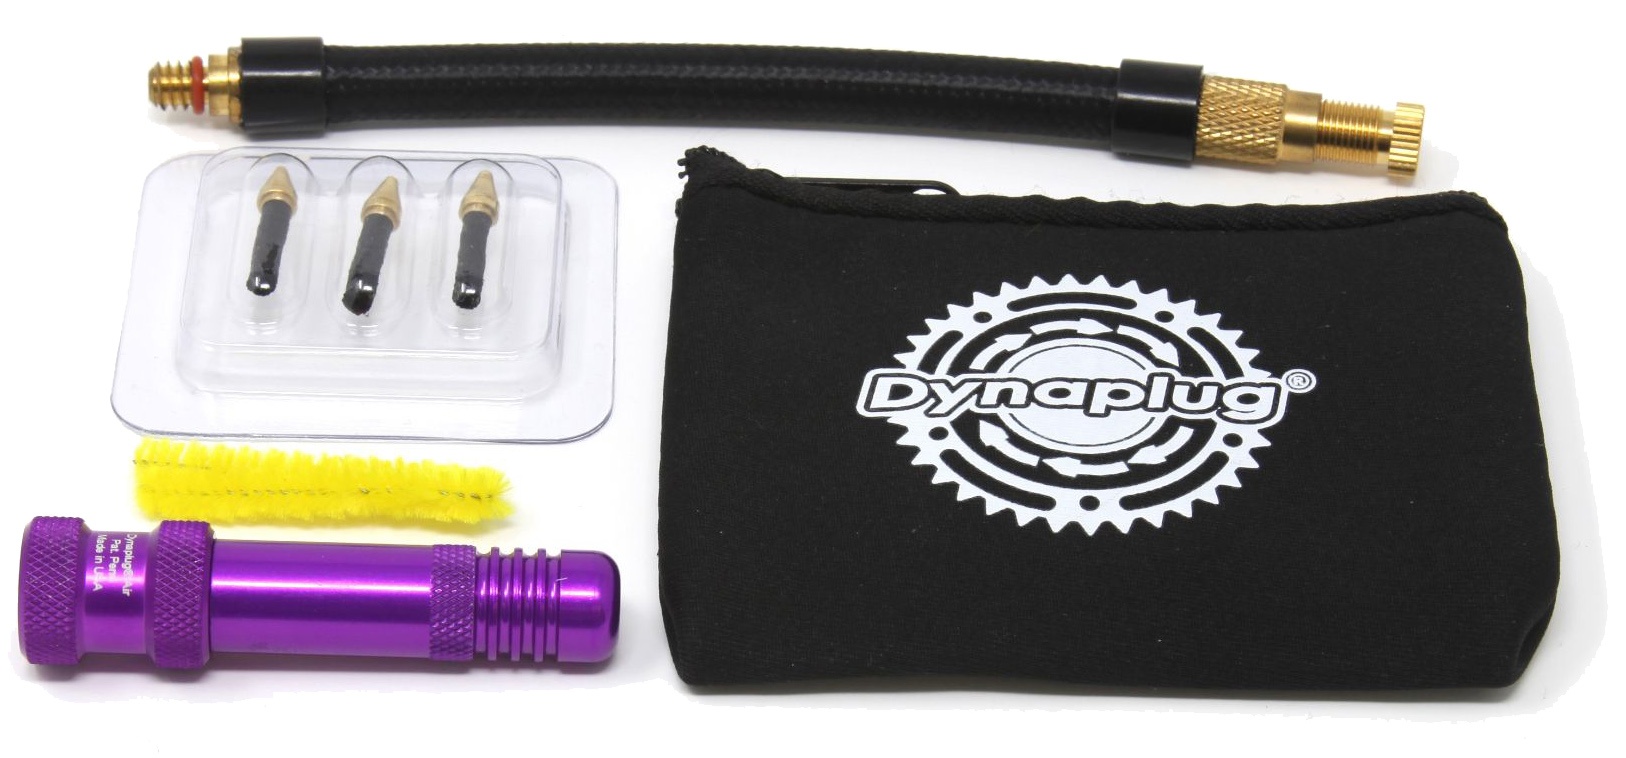 Reservedele - Tubeless - Dynaplug Air Tubeless MTB Tyre Repair and Inflation Kit - Lilla